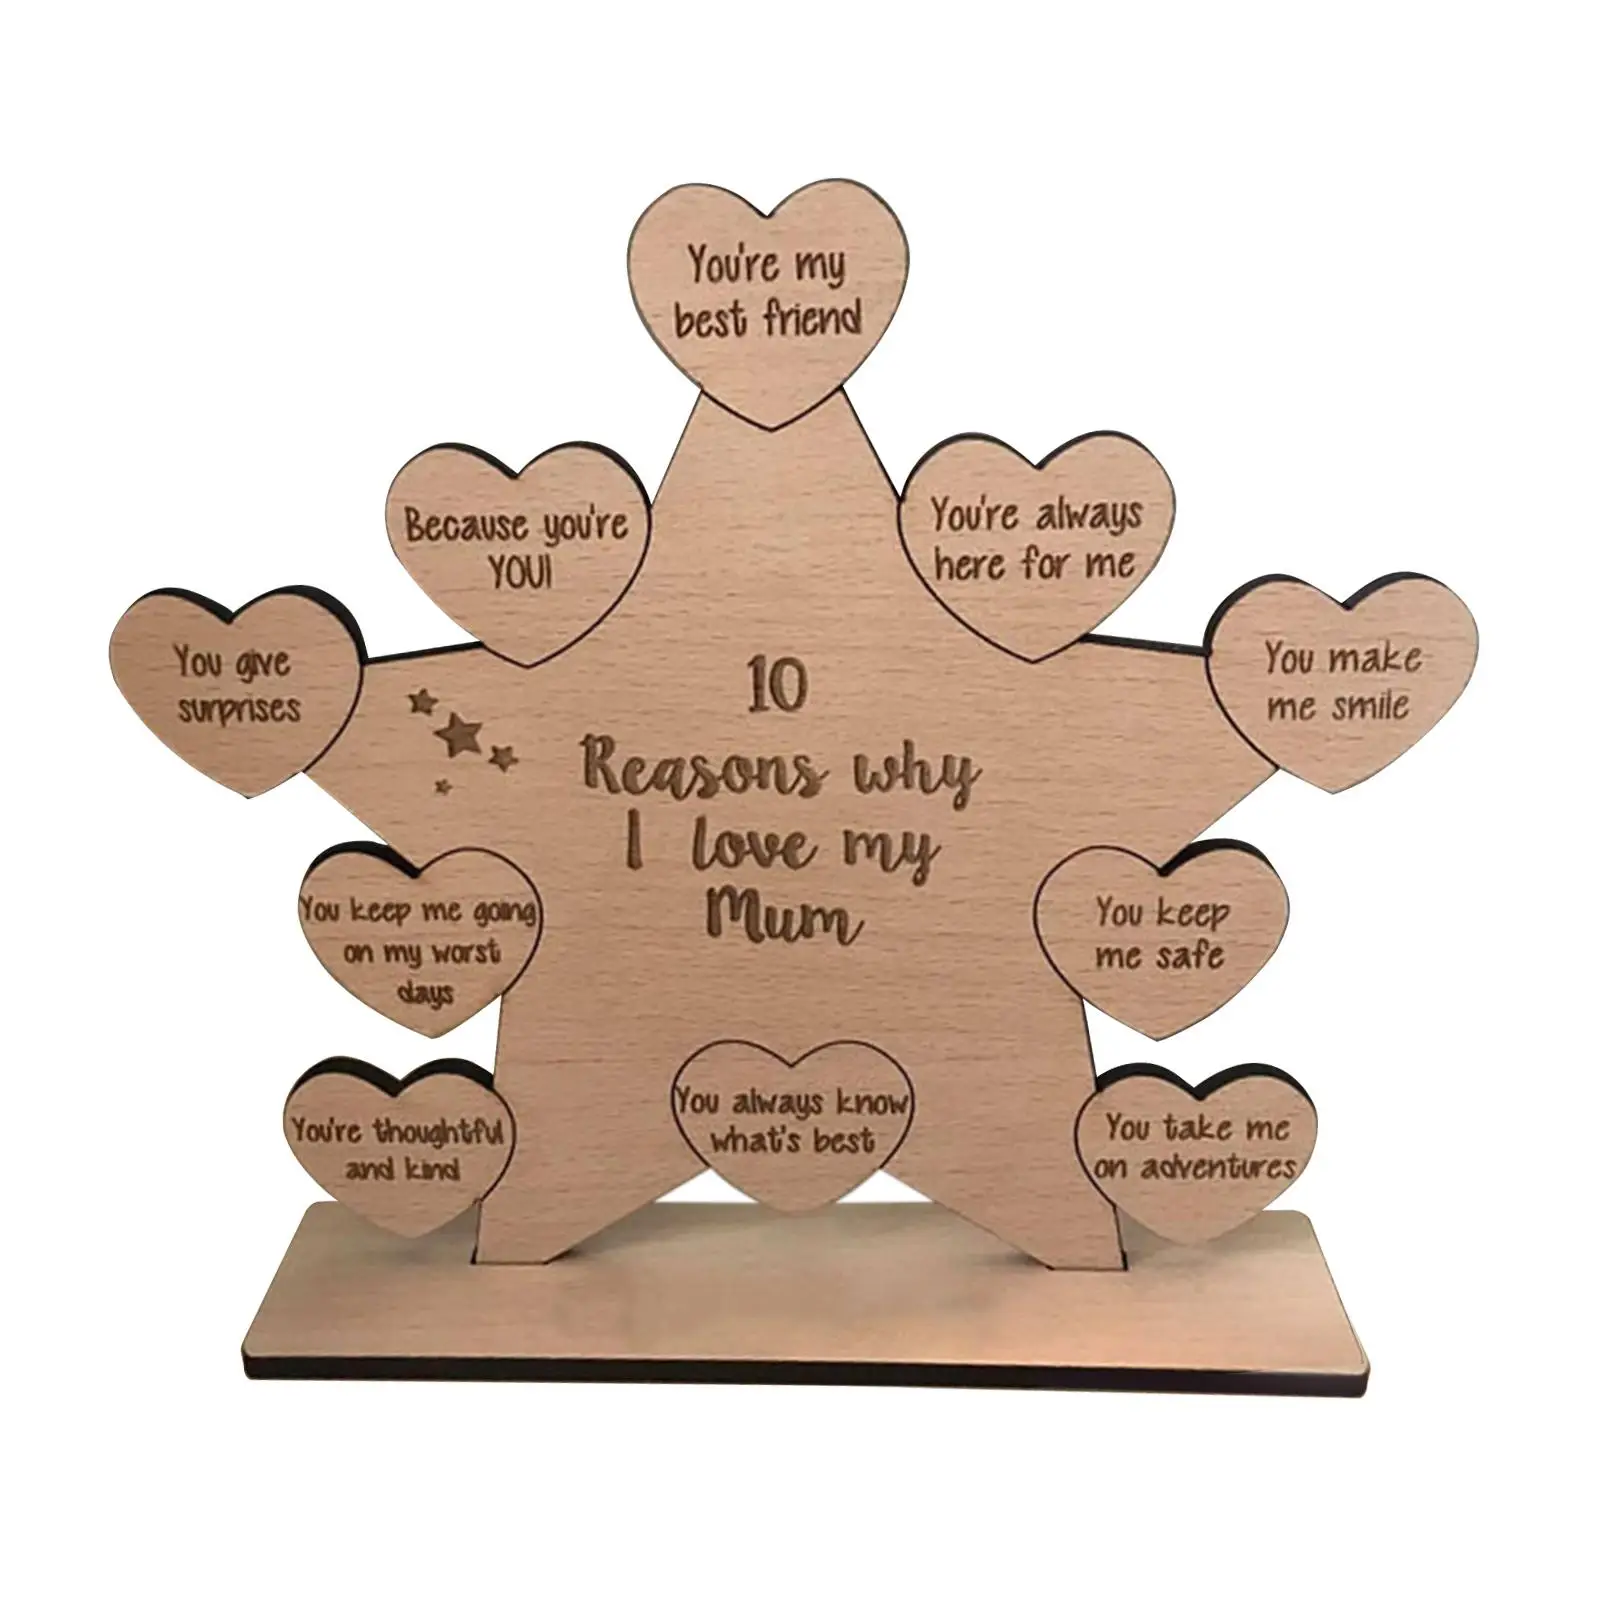 Handmade Wooden Mothers day Decorations 10 Reasons Why I Love My Mum Sign Women Ladies Wife Anniversary Gift Home Decor